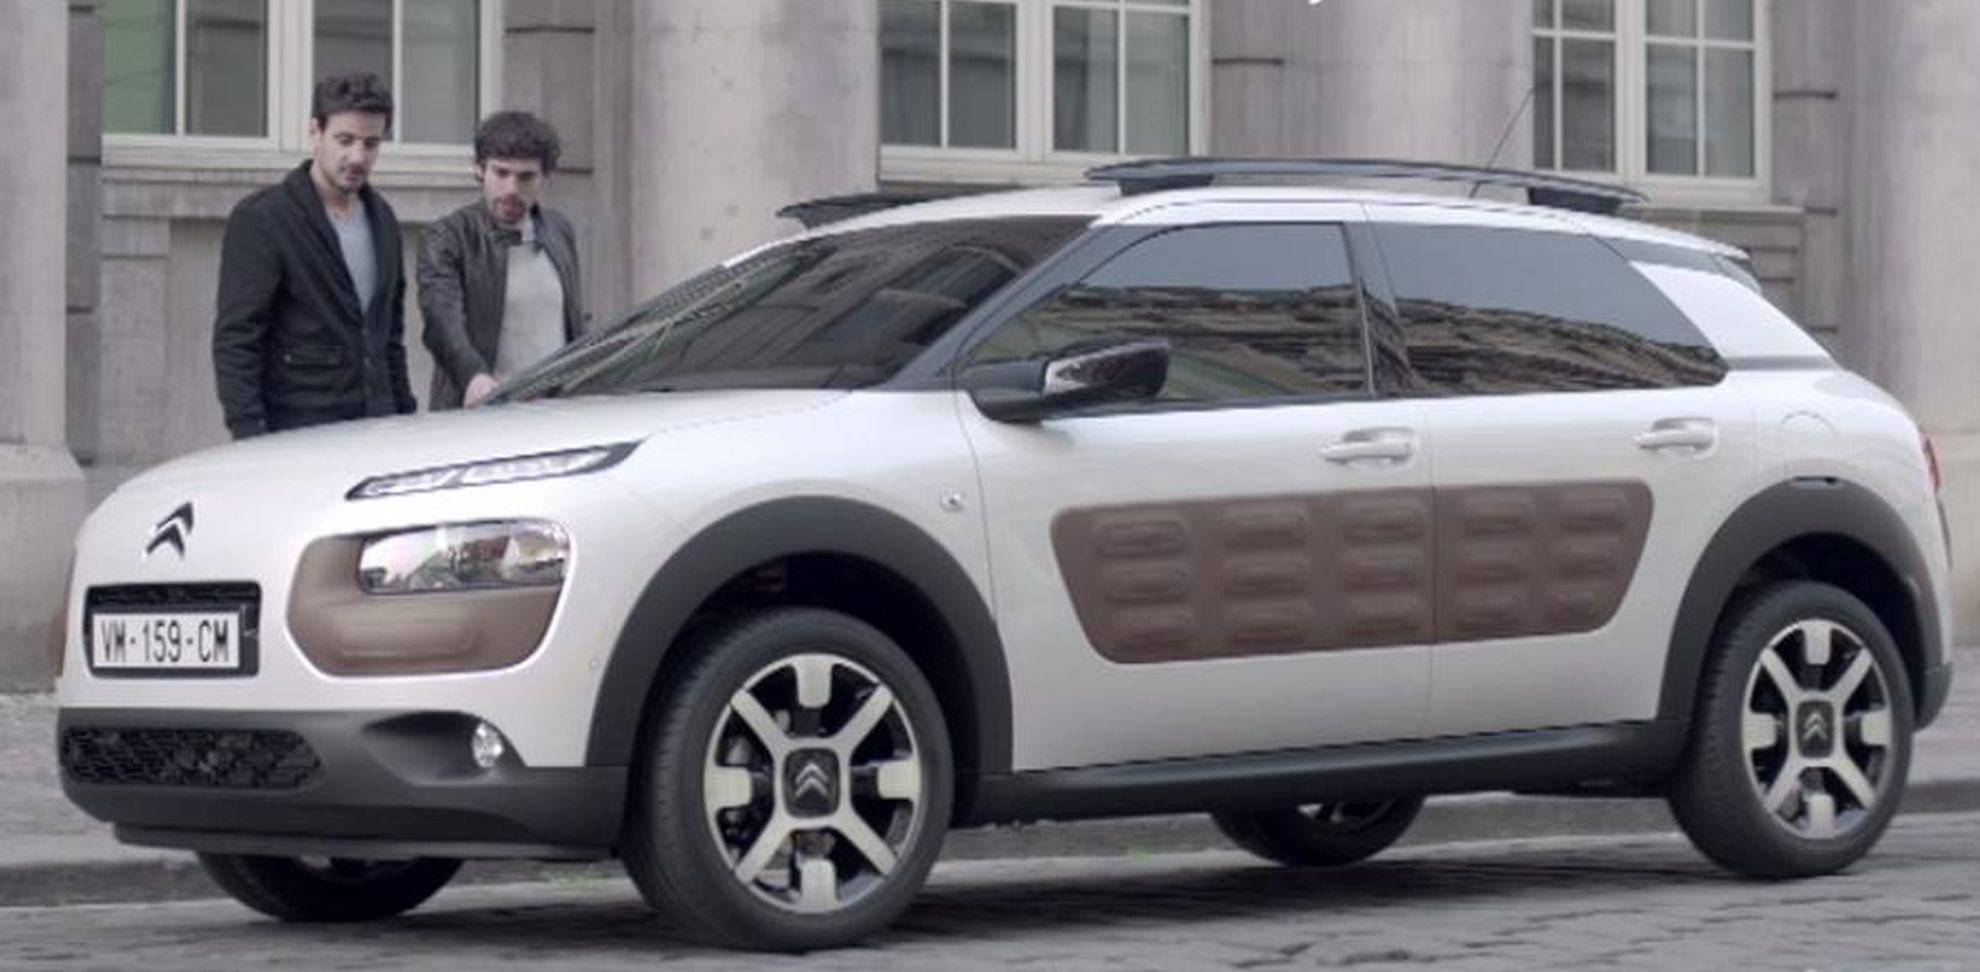 CITROËN C4 CACTUS WINS THE 2015 WORLD CAR DESIGN OF THE YEAR AWARD IN NEW YORK